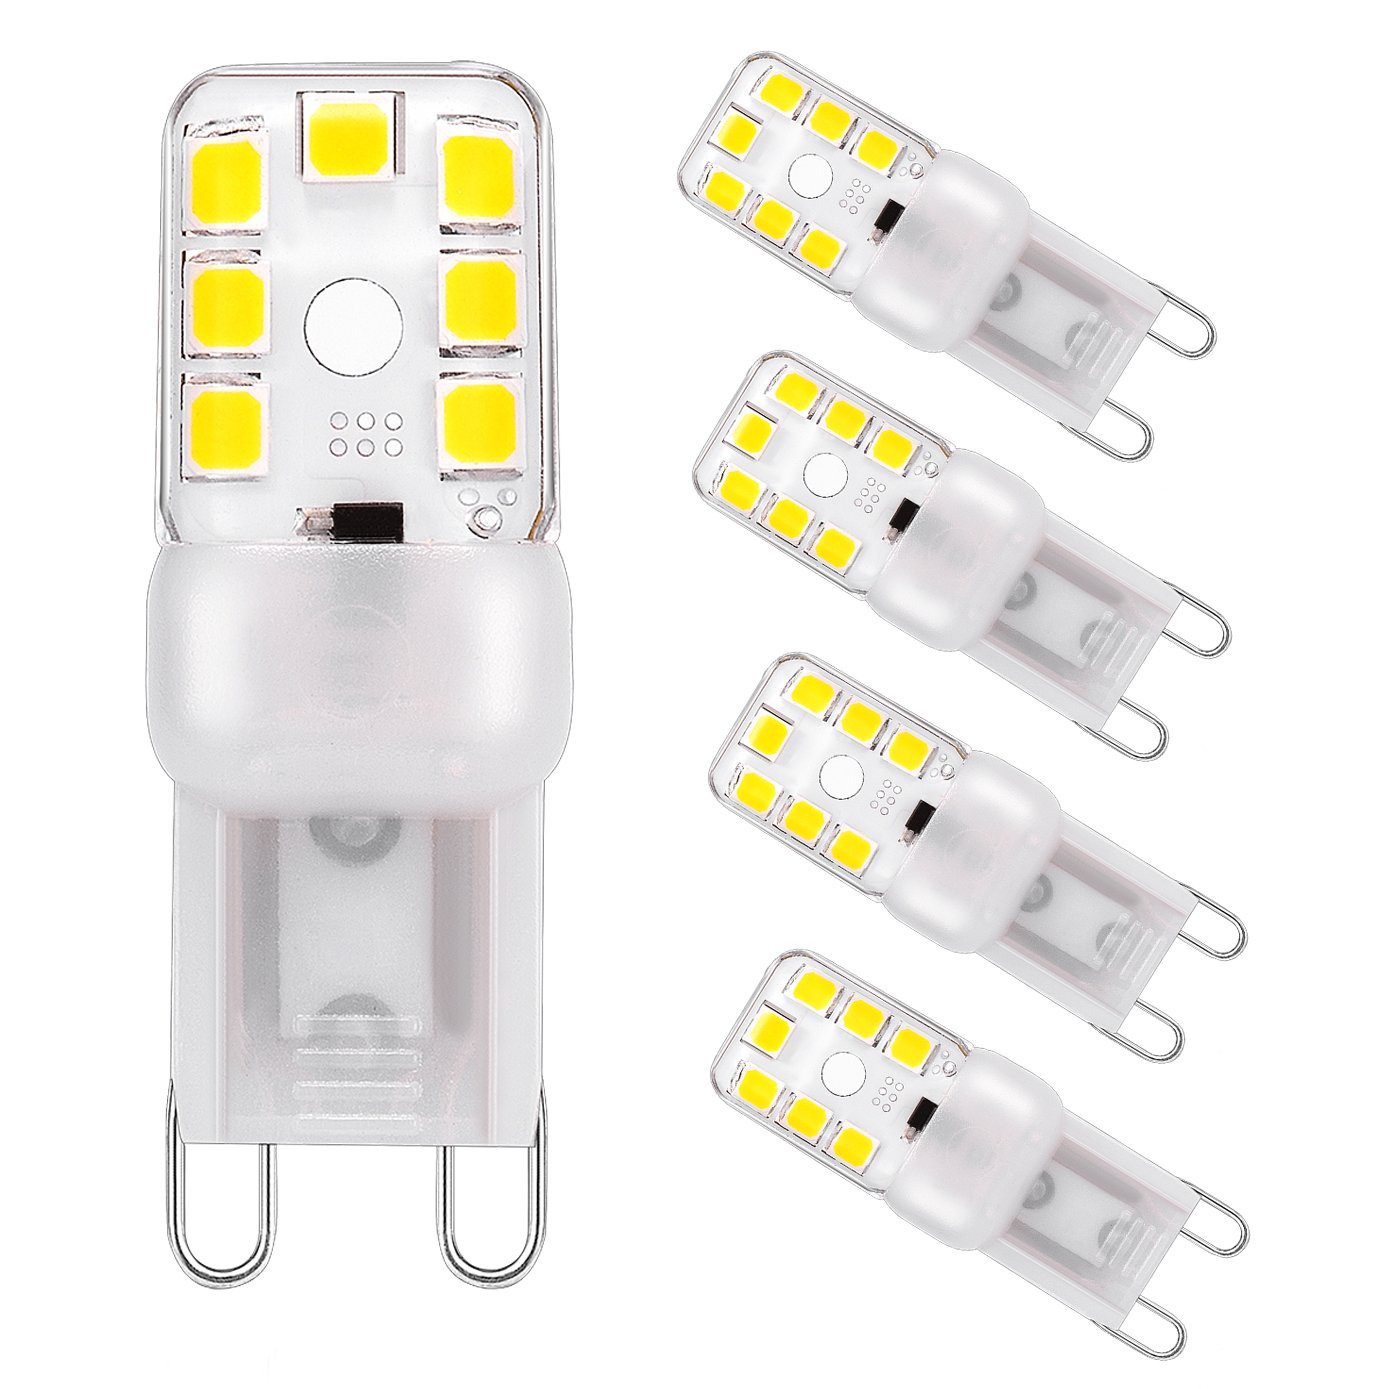 1-10 Pcs G9 LED Light Bulbs 3W 5W 7W Dimmable Capsule Warm Cool White Home Lamps 